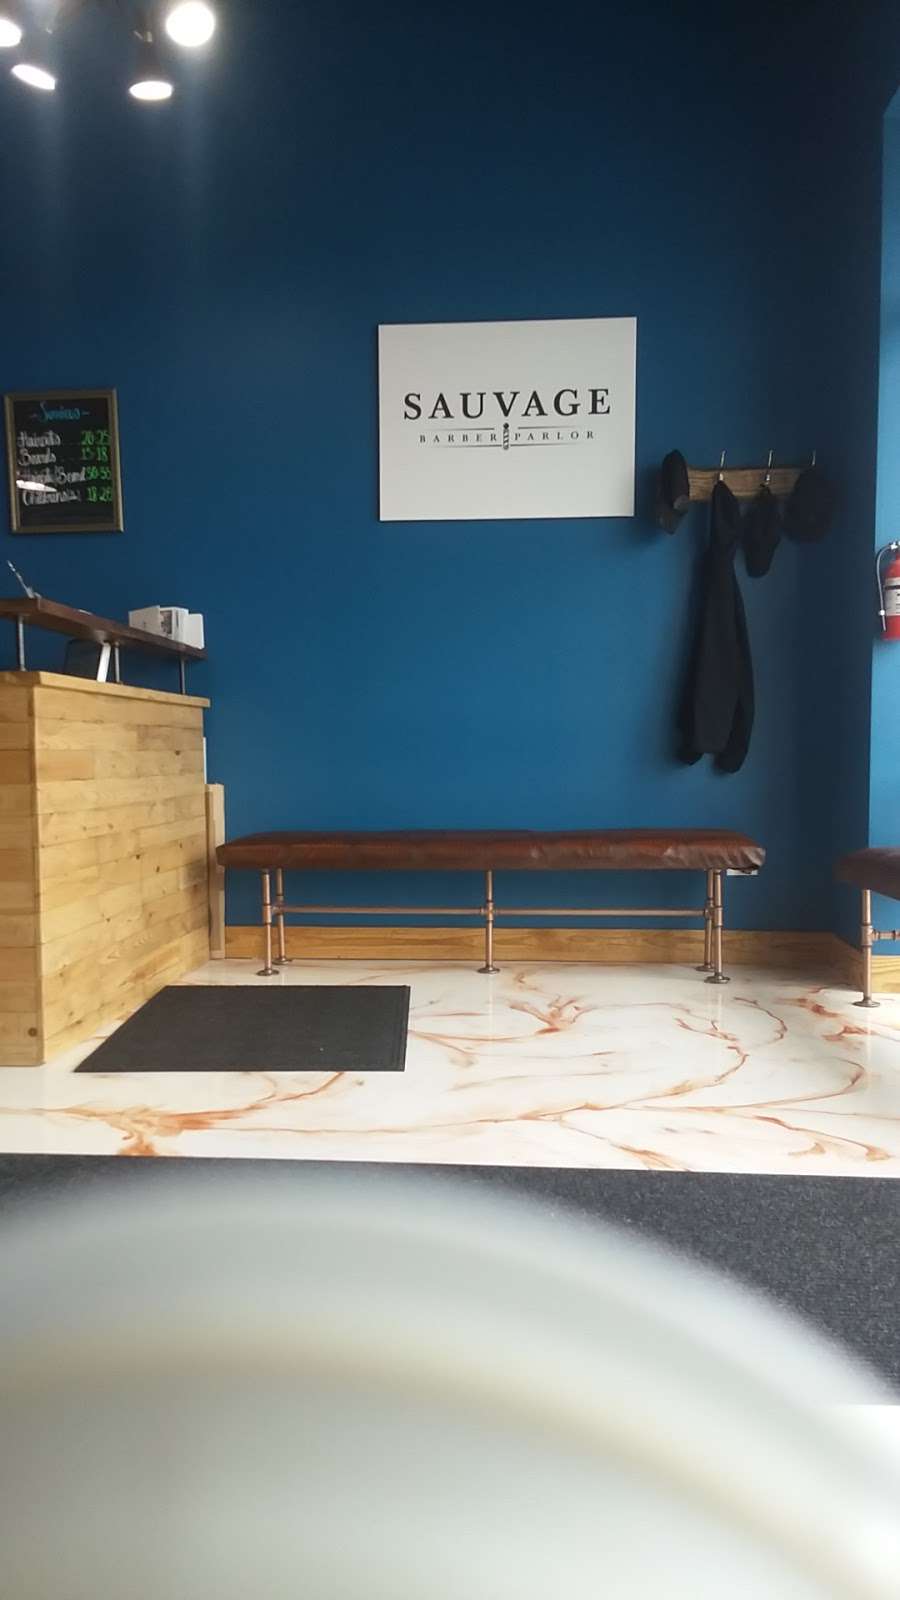 Sauvage Barber Parlor | 3145 W. US-20 #202, Elgin, IL 60124 | Phone: (224) 760-7932